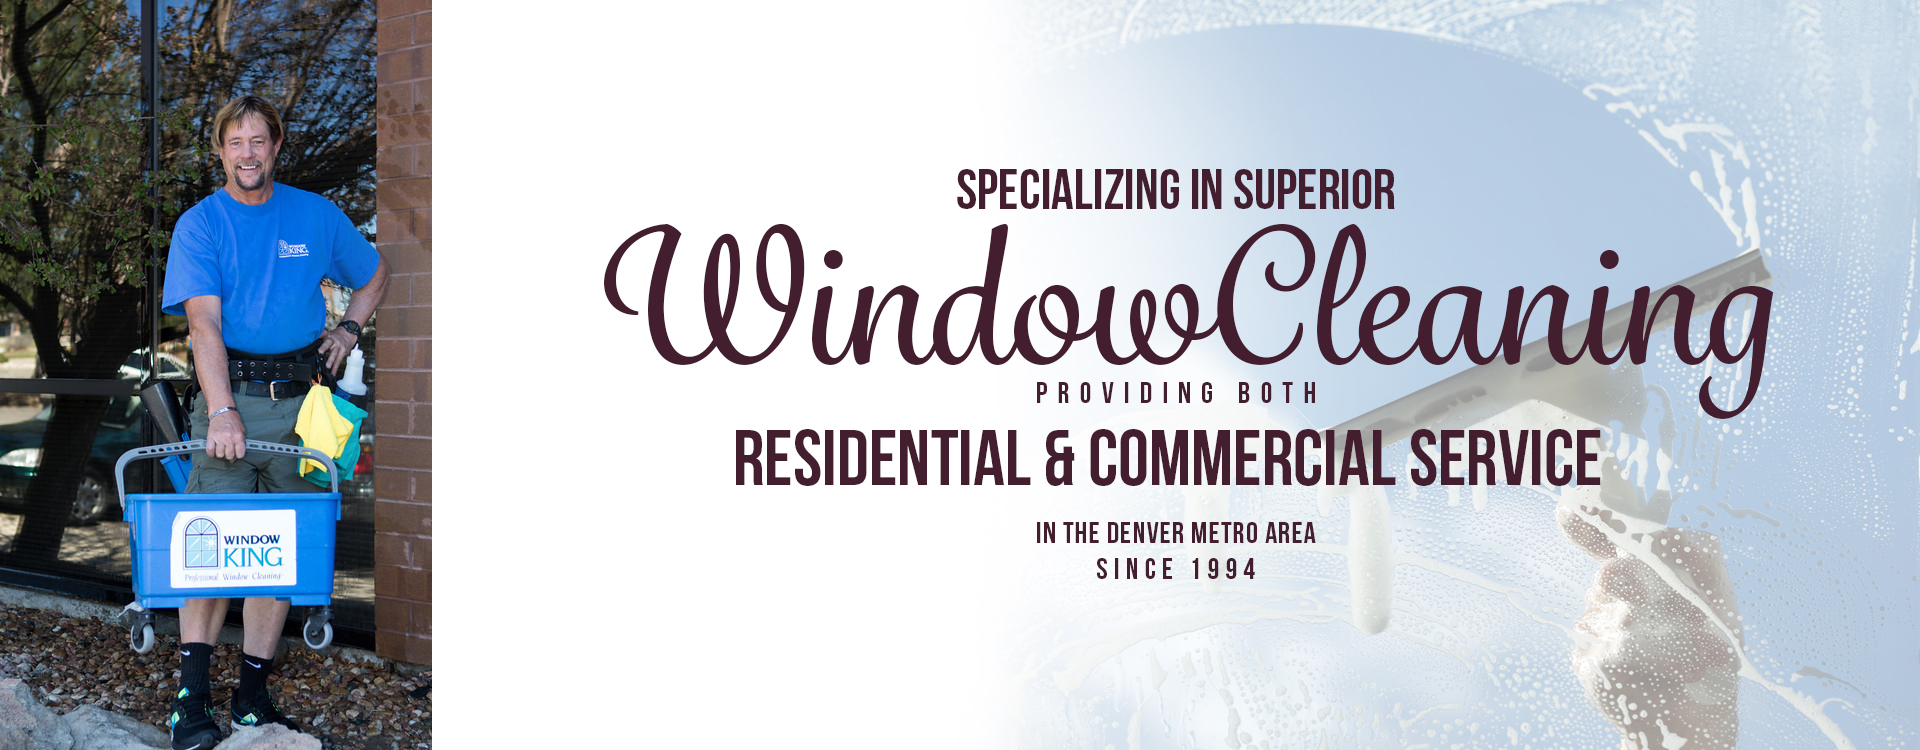 Window King provides superior residential and commercial service in the Denver Metro Area, and has since 1984.